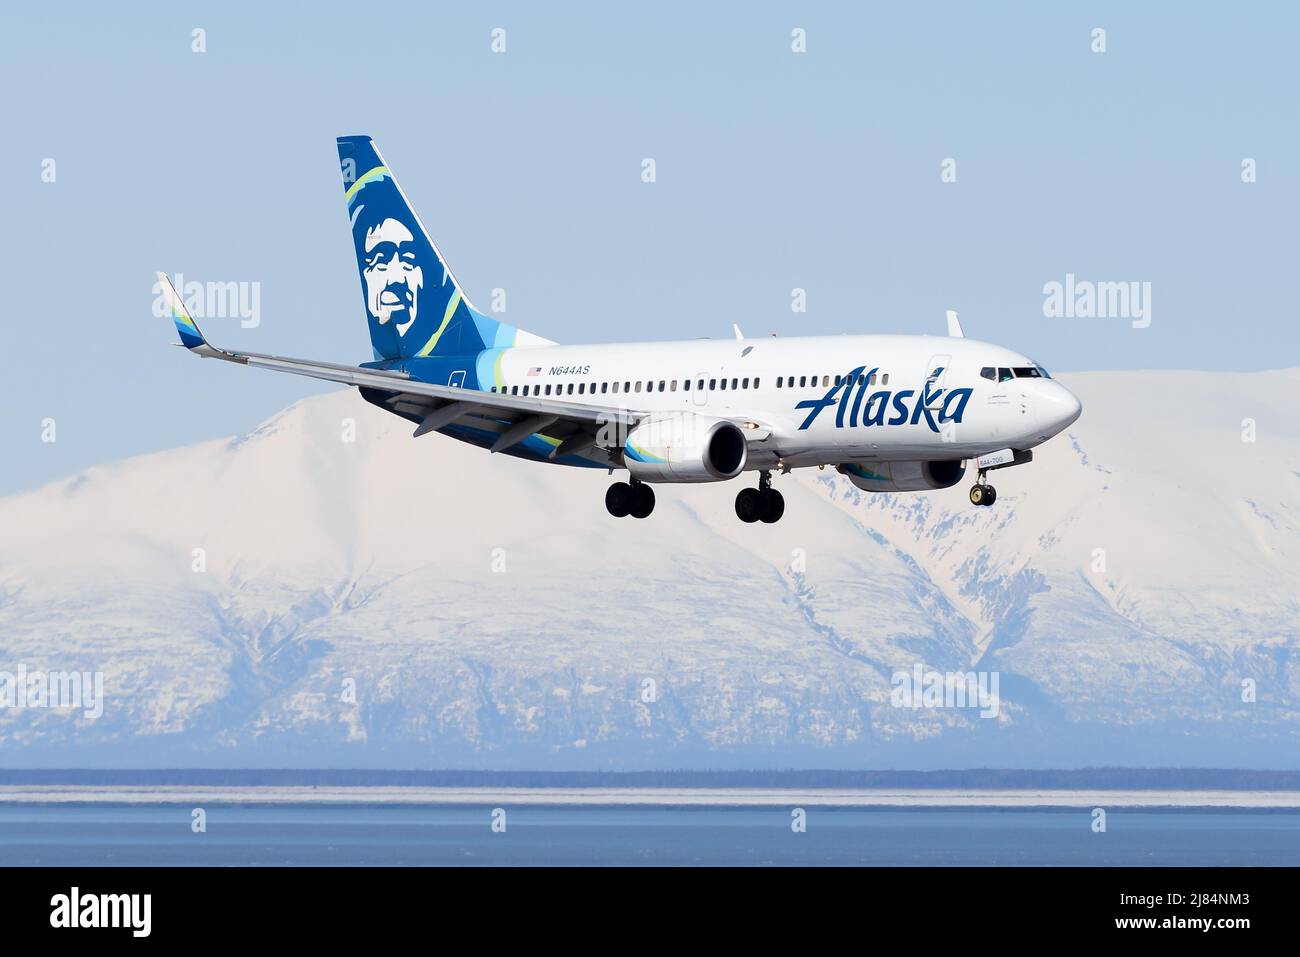 Alaska Airlines Boeing 737 airplane arriving in Anchorage, Alaska. Airline with B737 aircraft. Plane 737-700 of Alaska Airlines N644AS. Stock Photo